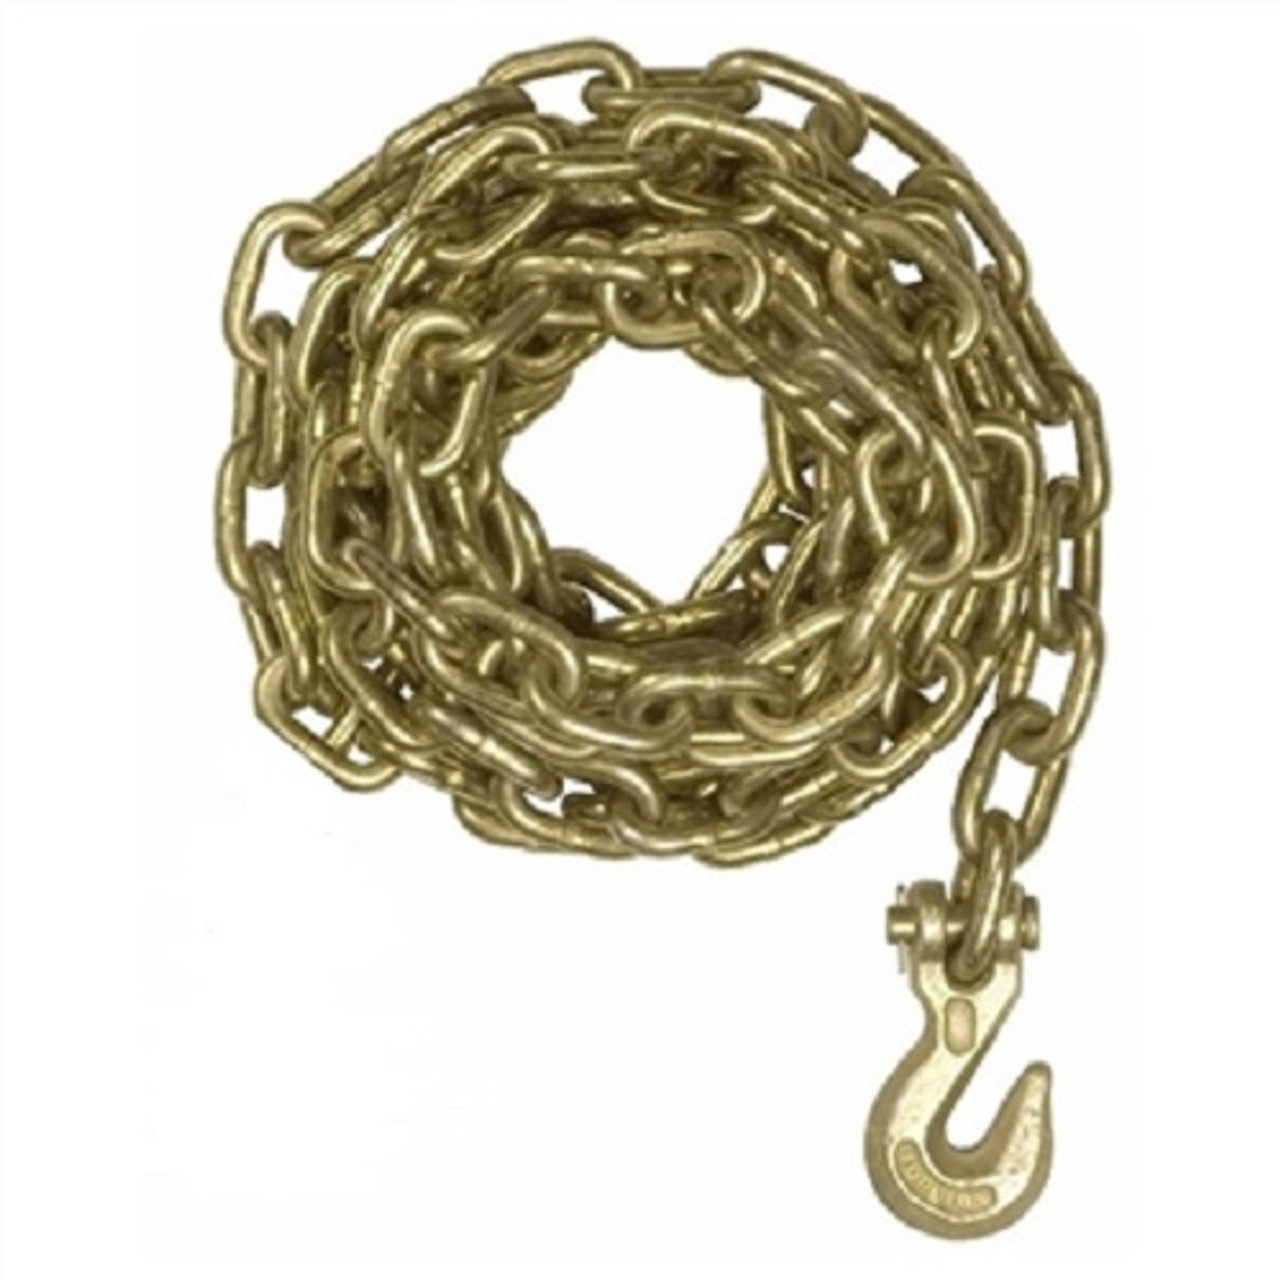 Mo-Clamp 6012 3/8" X 12' Chain with Grab Hook